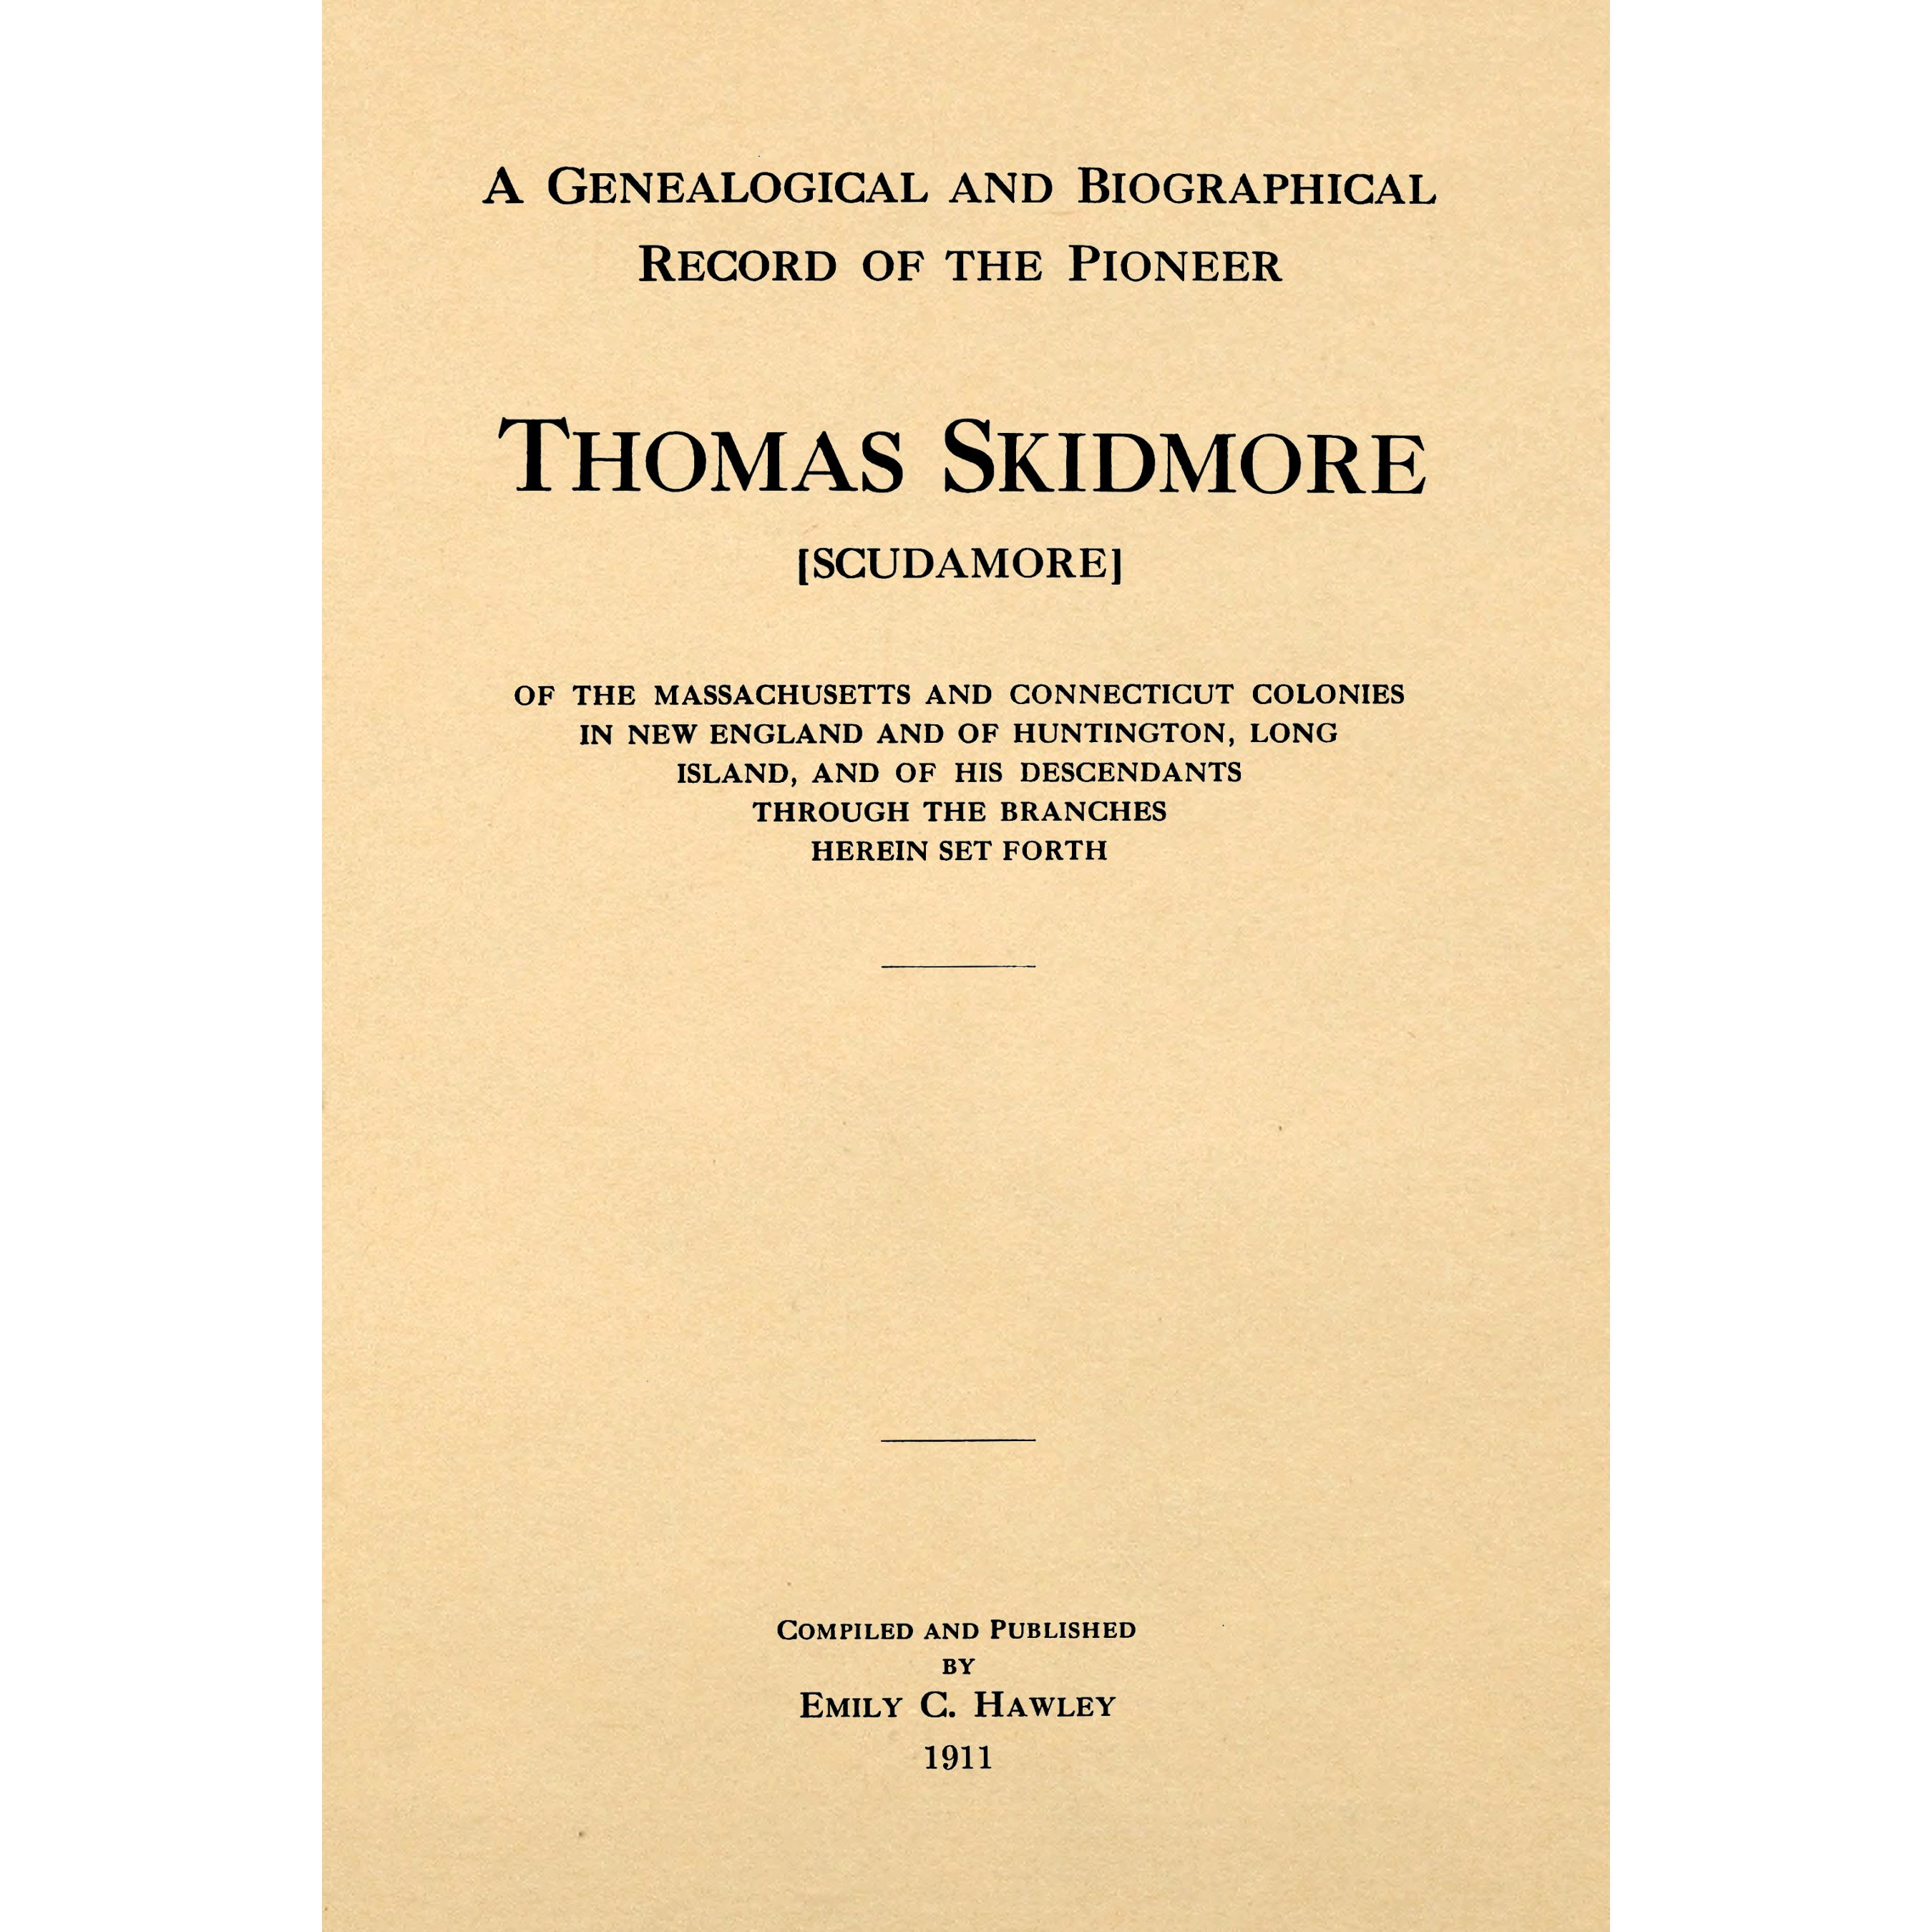 A genealogical and biographical record of the pioneer Thomas Skidmore